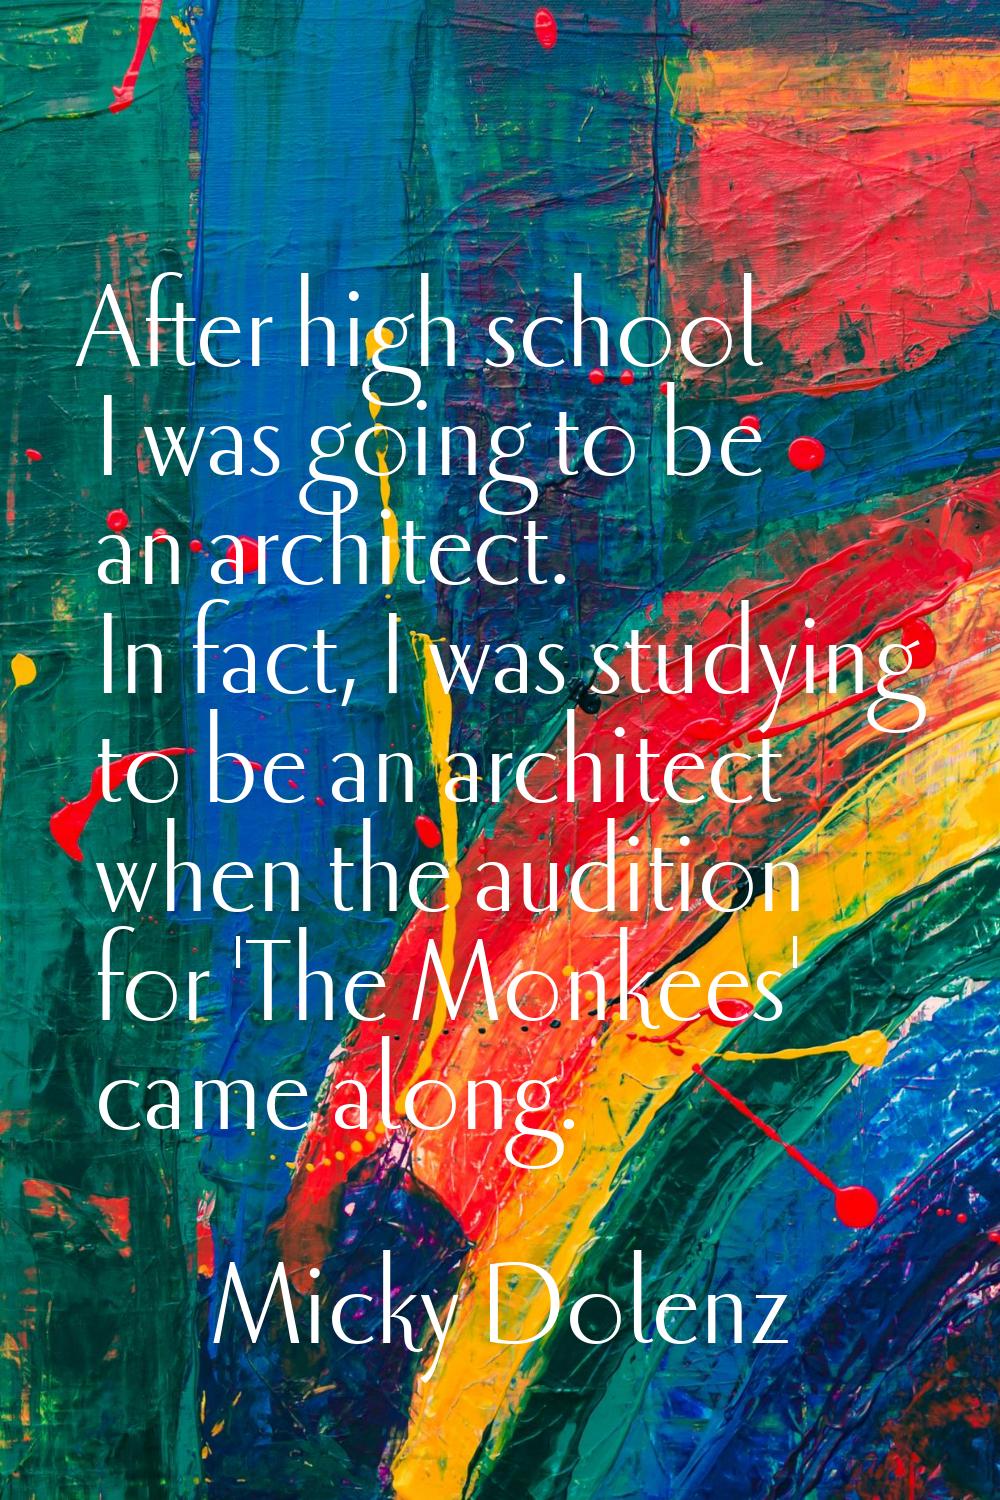 After high school I was going to be an architect. In fact, I was studying to be an architect when t